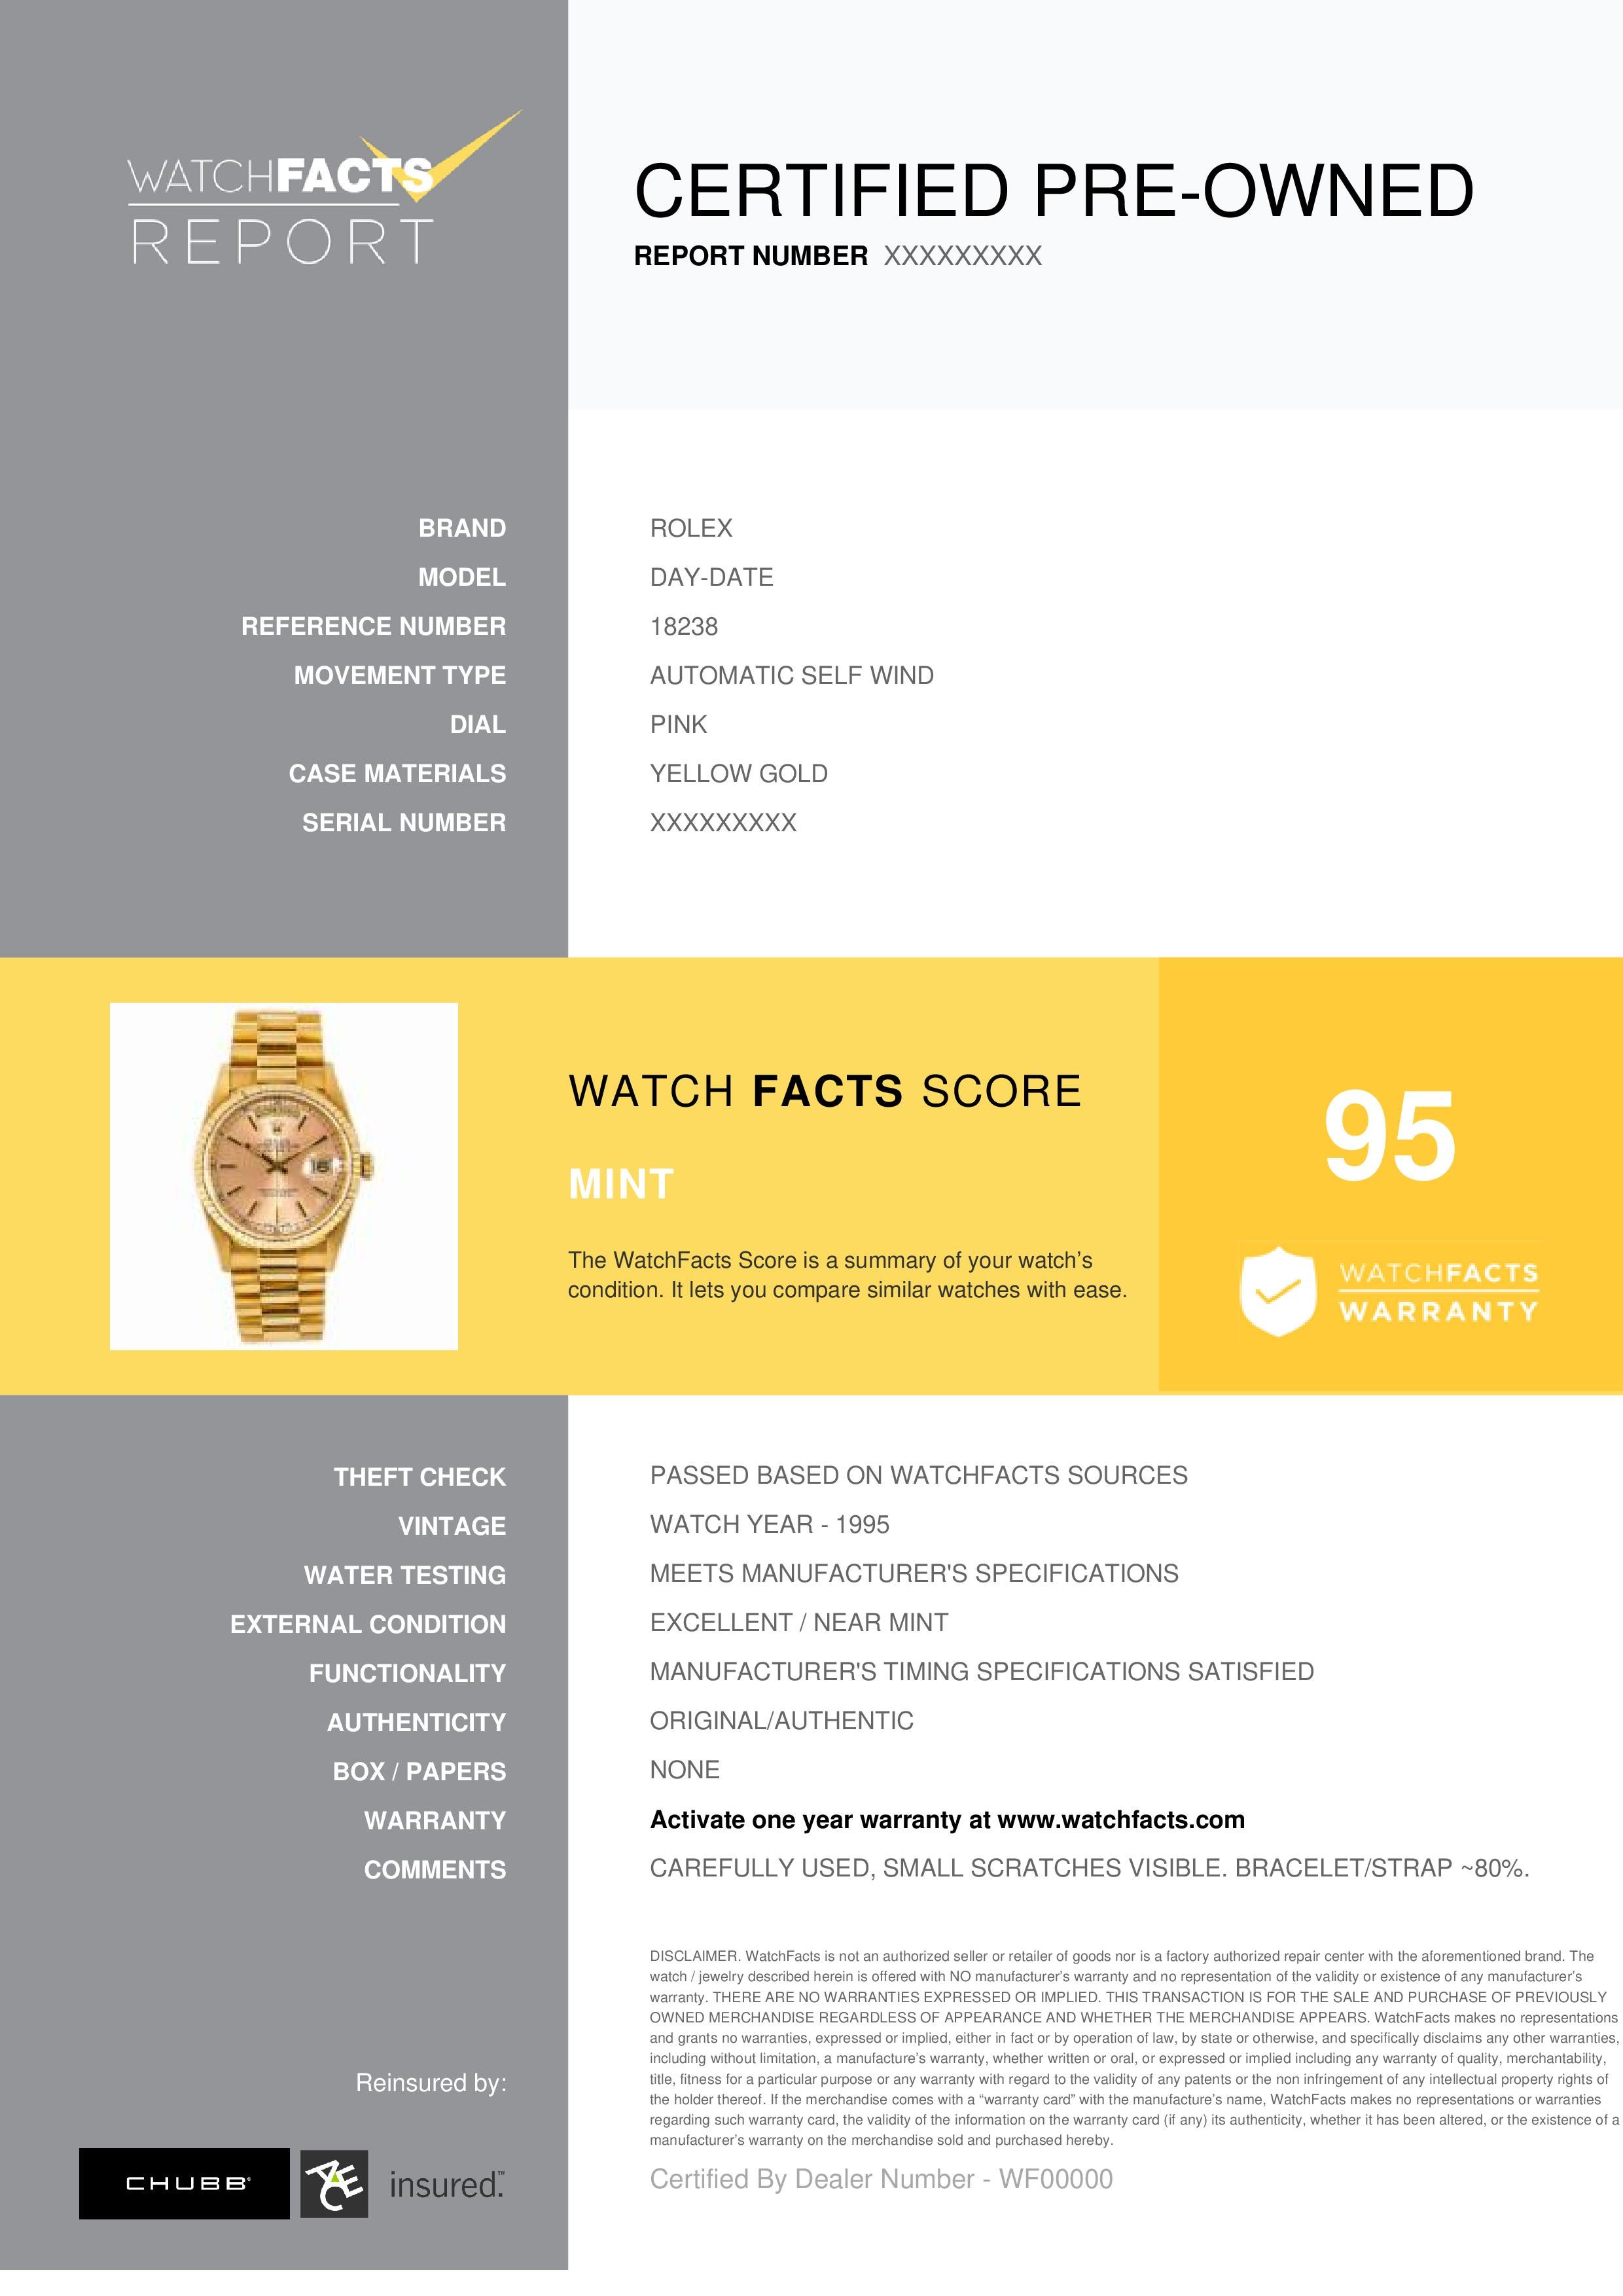 Rolex Day-Date Reference #: 18238. Mens Automatic Self Wind Watch Yellow Gold Pink 36 MM. Verified and Certified by WatchFacts. 1 year warranty offered by WatchFacts.
